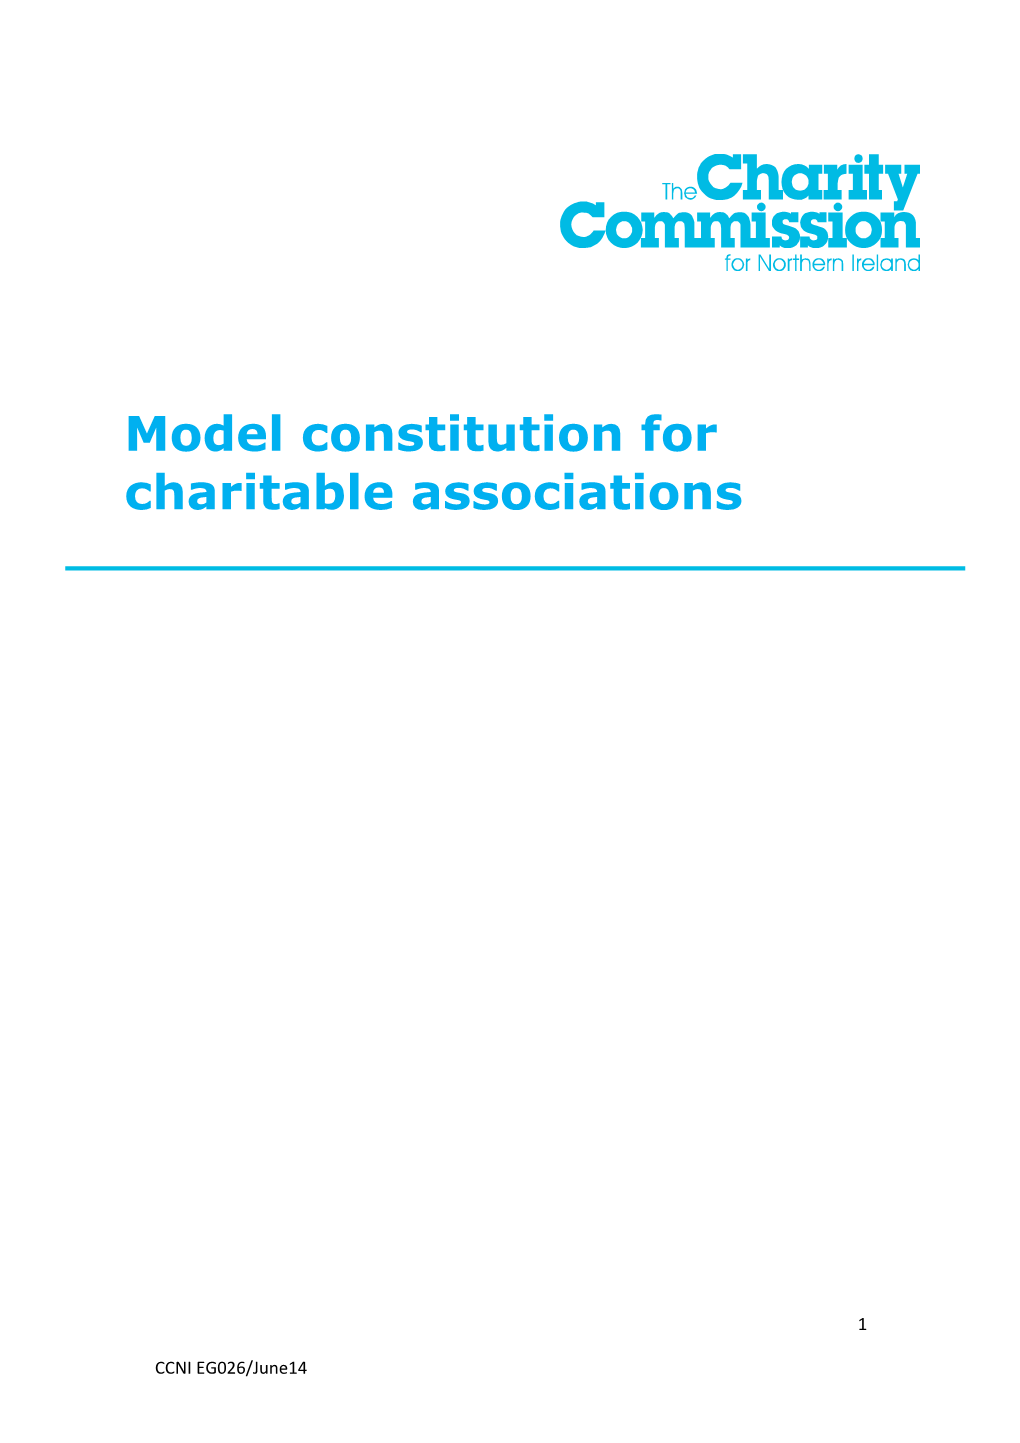 Model Constitution for Charitable Associations